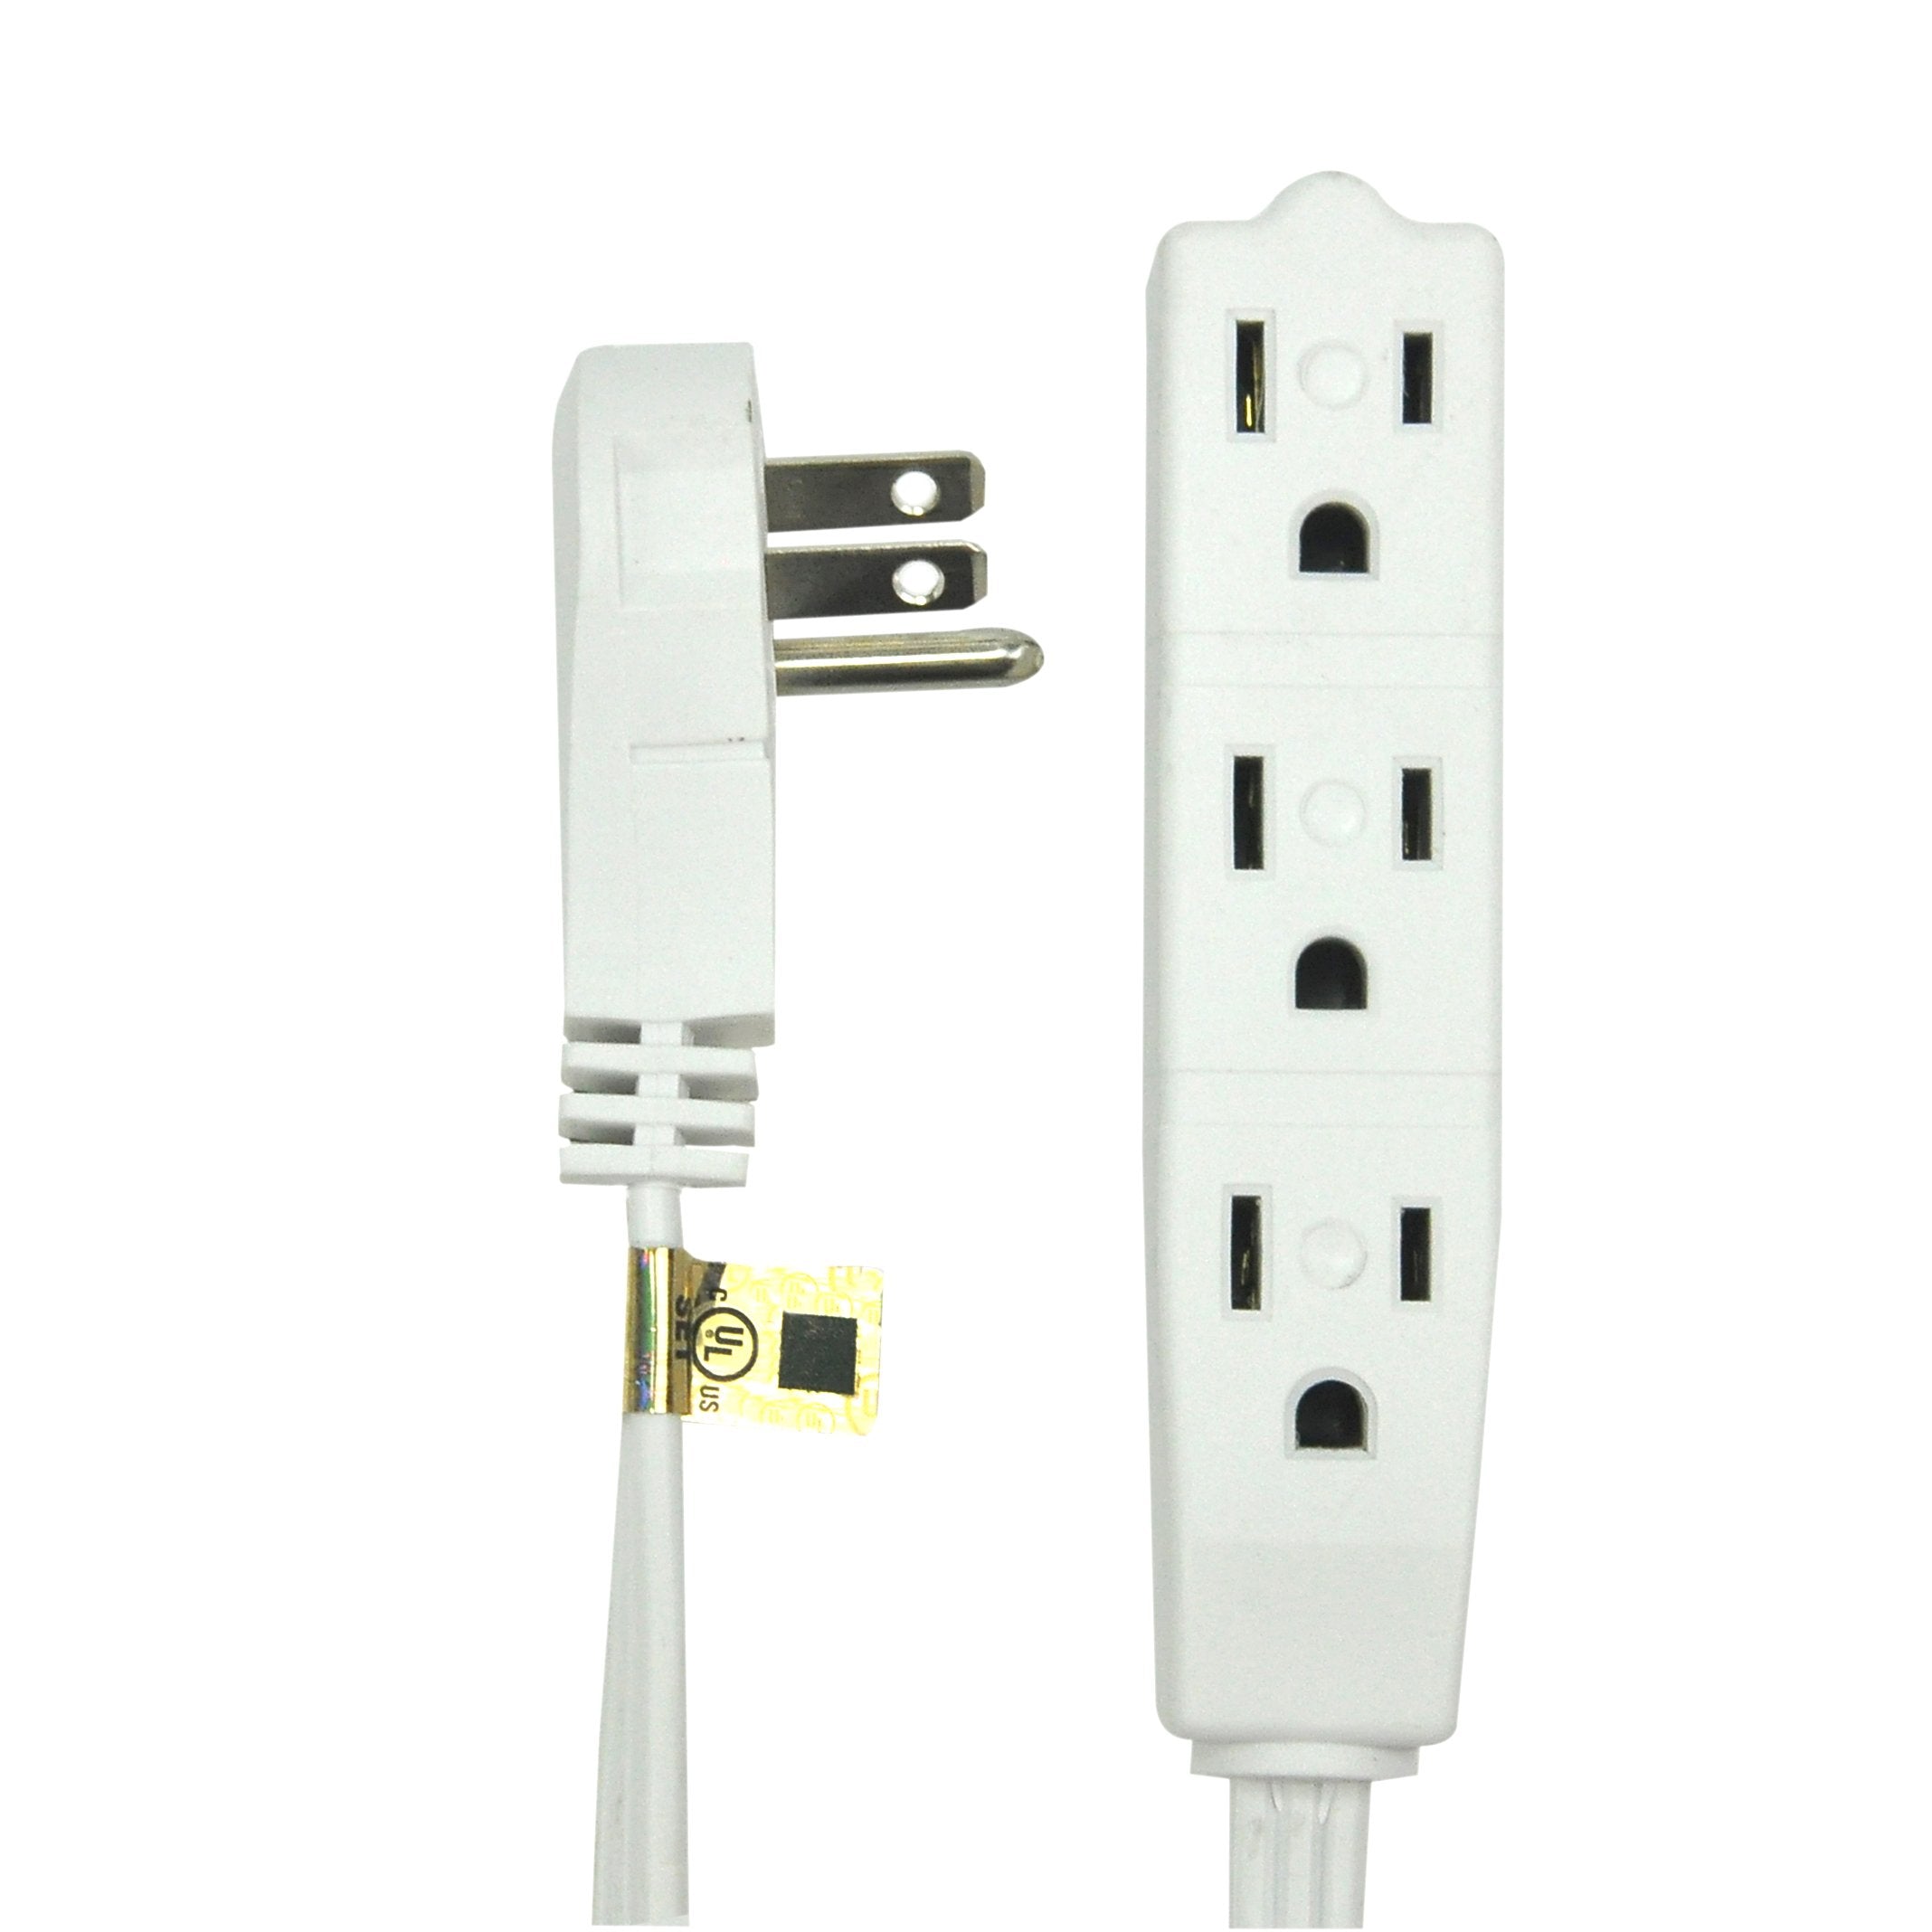 Flat Multiple Outlet Extension Cord for Indoor Use by Bindmaster- UL-Listed 3-Prong Multi Extension Wire- Space-Saving Flat Angled Extension Cord- White  - Good